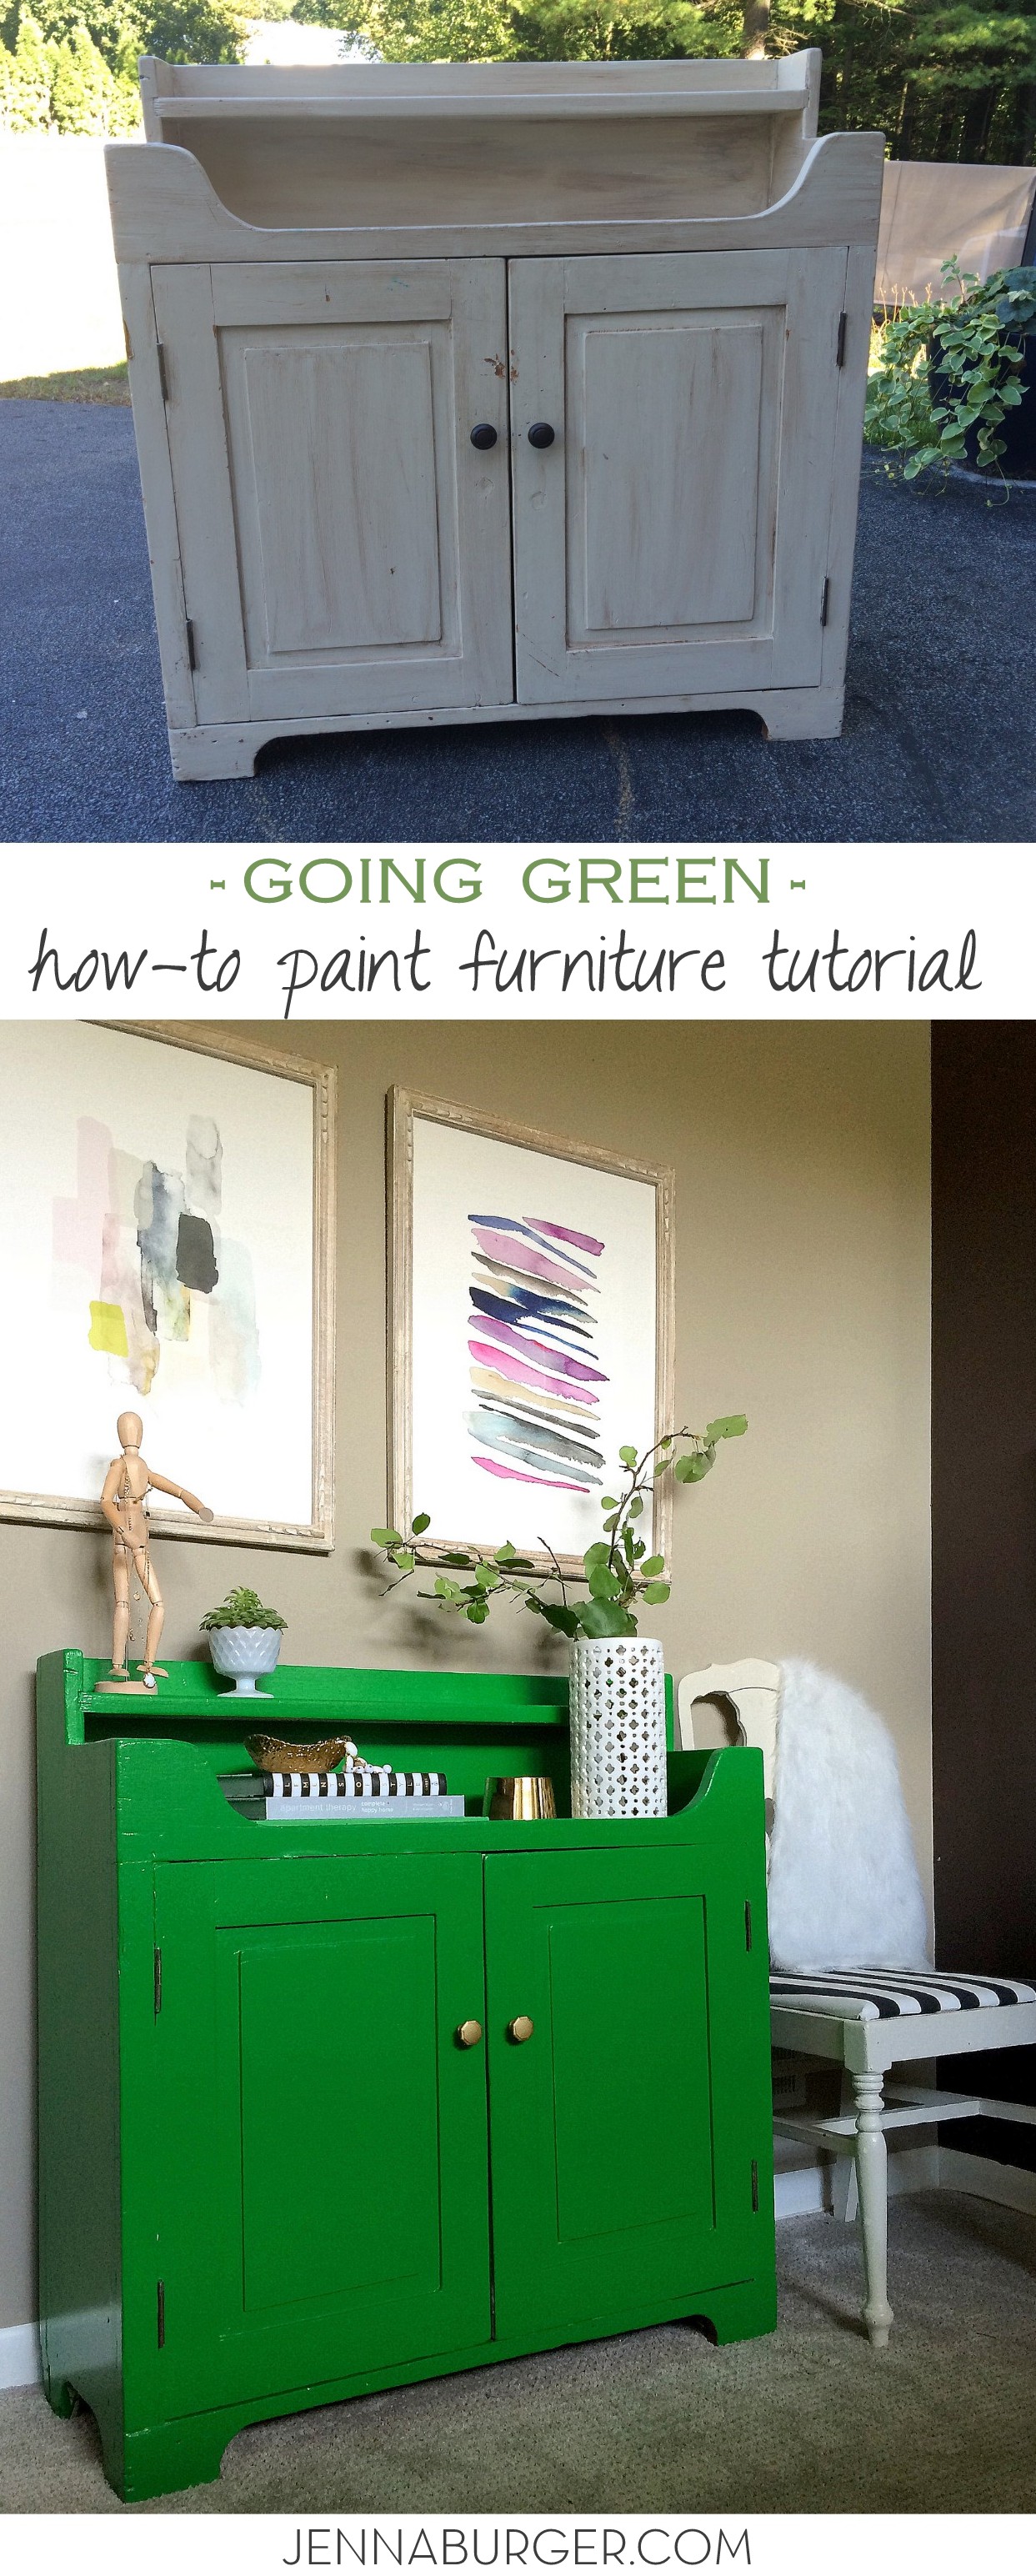 Furniture Makeover: TUTORIAL ON HOW-TO PAINT FURNITURE; before & after cabinet transformation by www.jennaburger.com